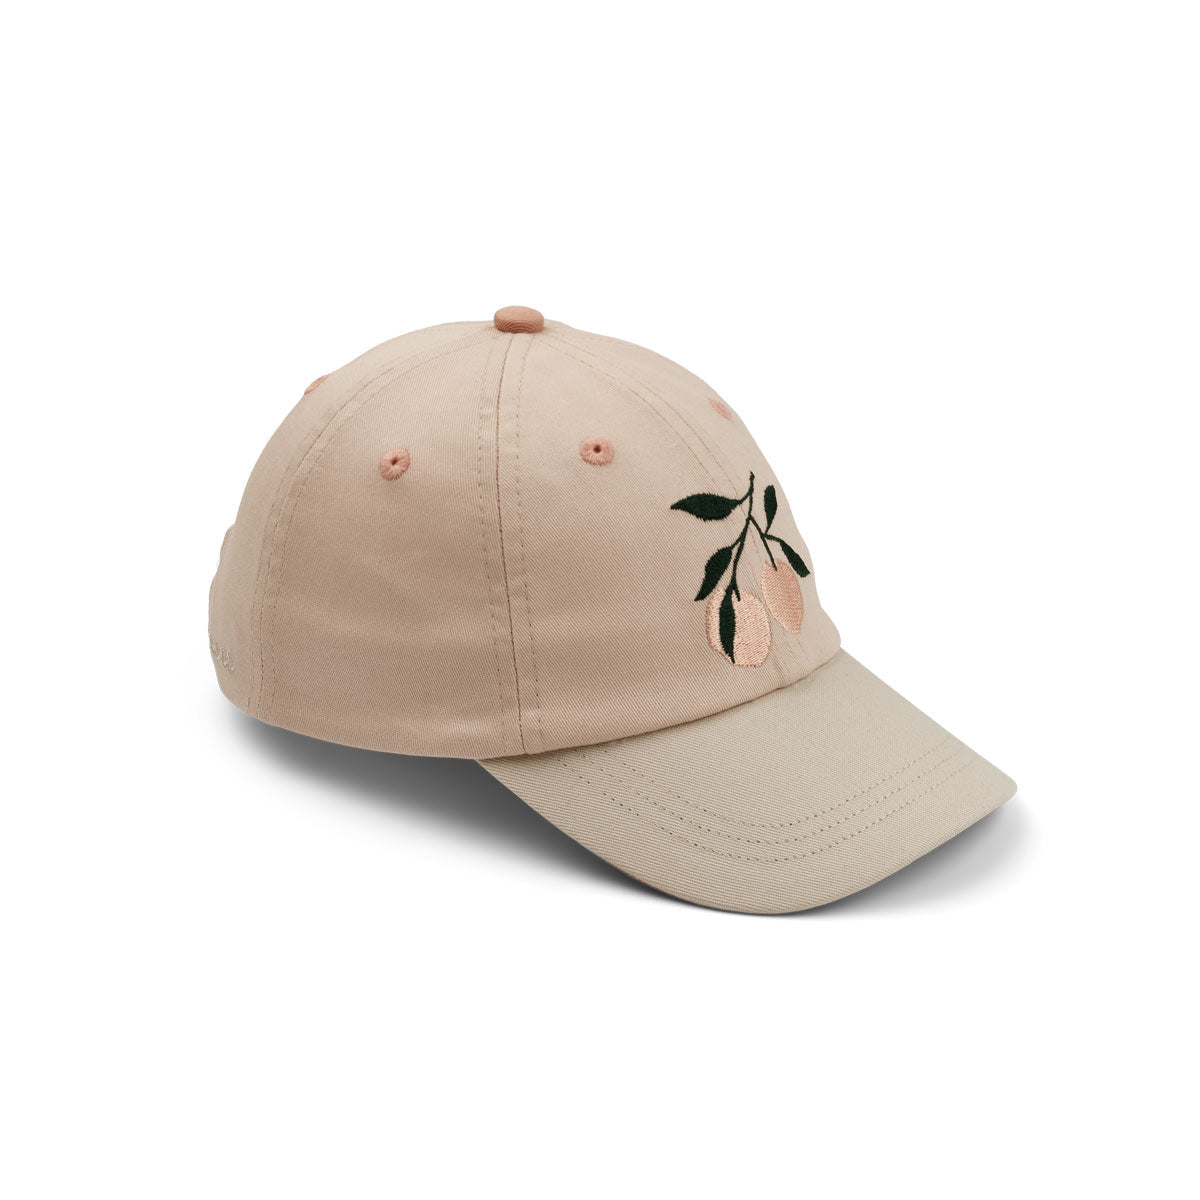 The Liewood Danny Cap is perfect for those summer months and is available from Nottinghamshire children’s store Alf & Co 